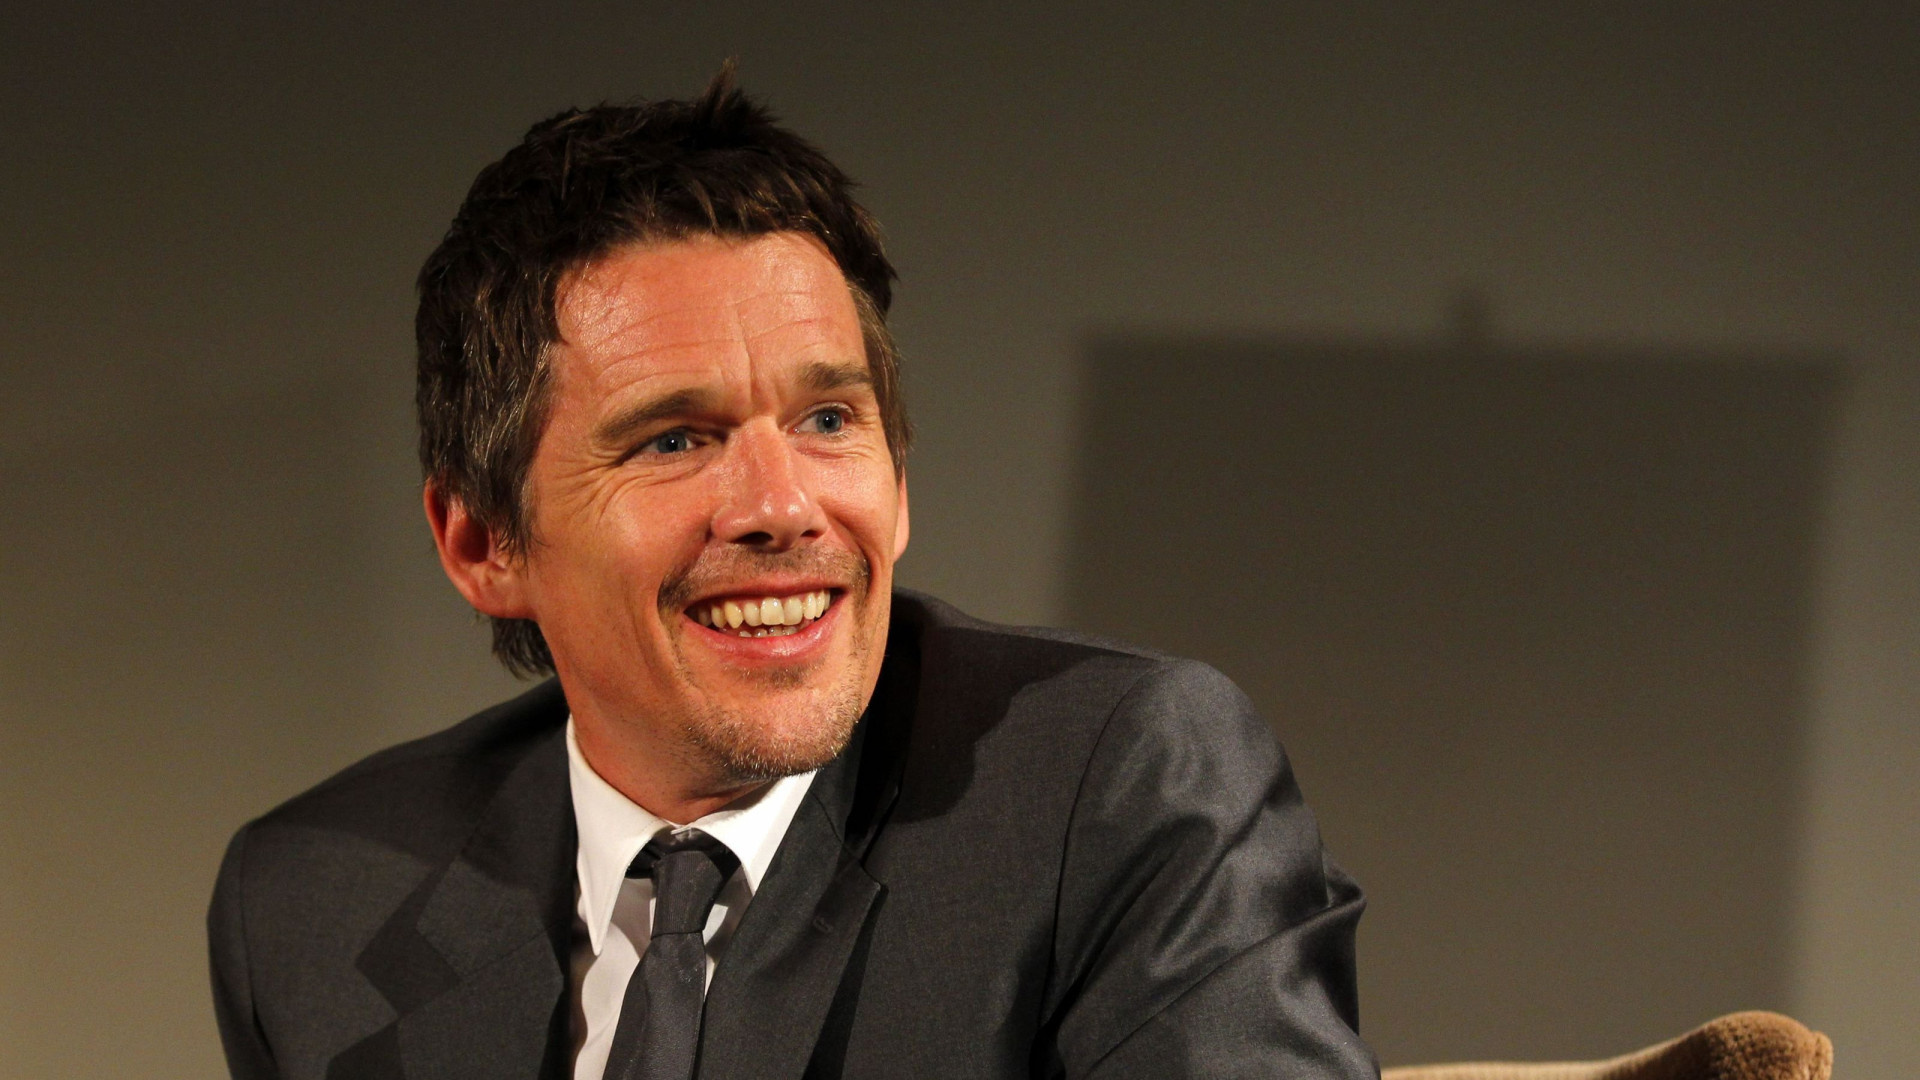 Ethan Hawke: Cast in a supporting role as Pete in Fast Food Nation, 2006. 1920x1080 Full HD Background.